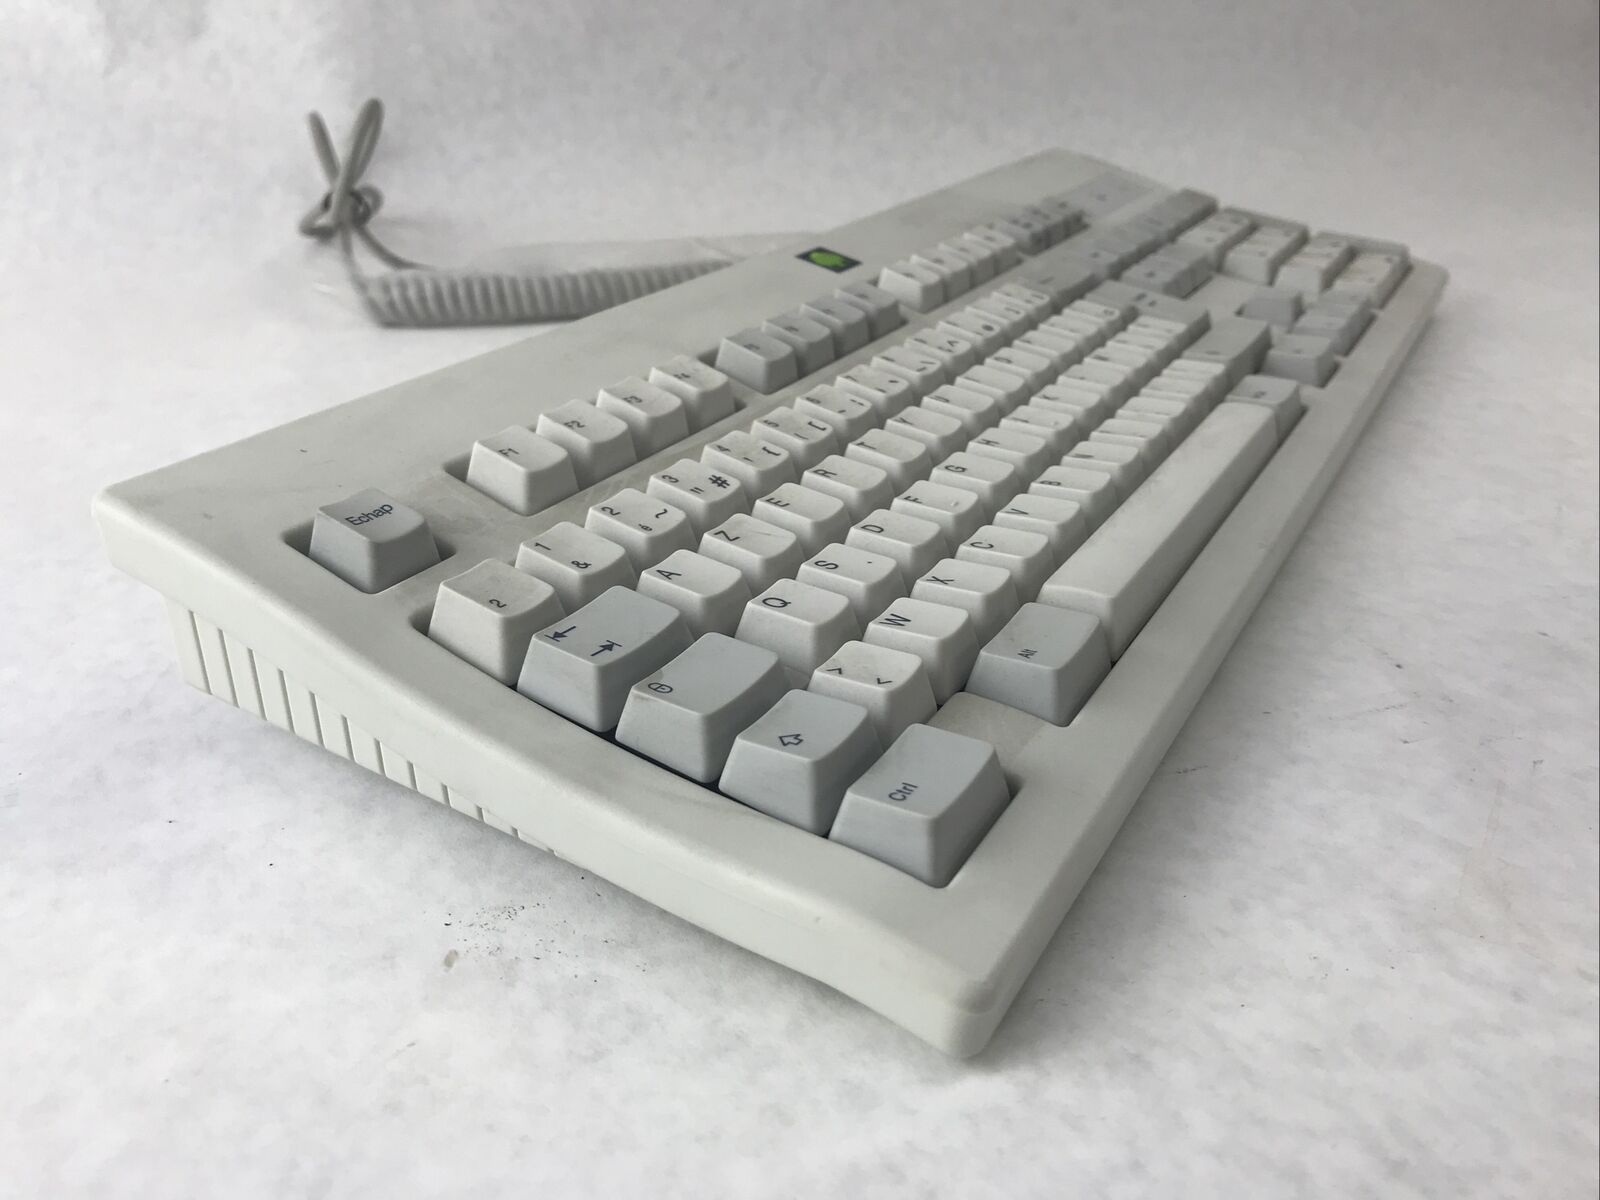 Zenith Data Systems SK-2000RE Keyboard French PS/2 Green Tree